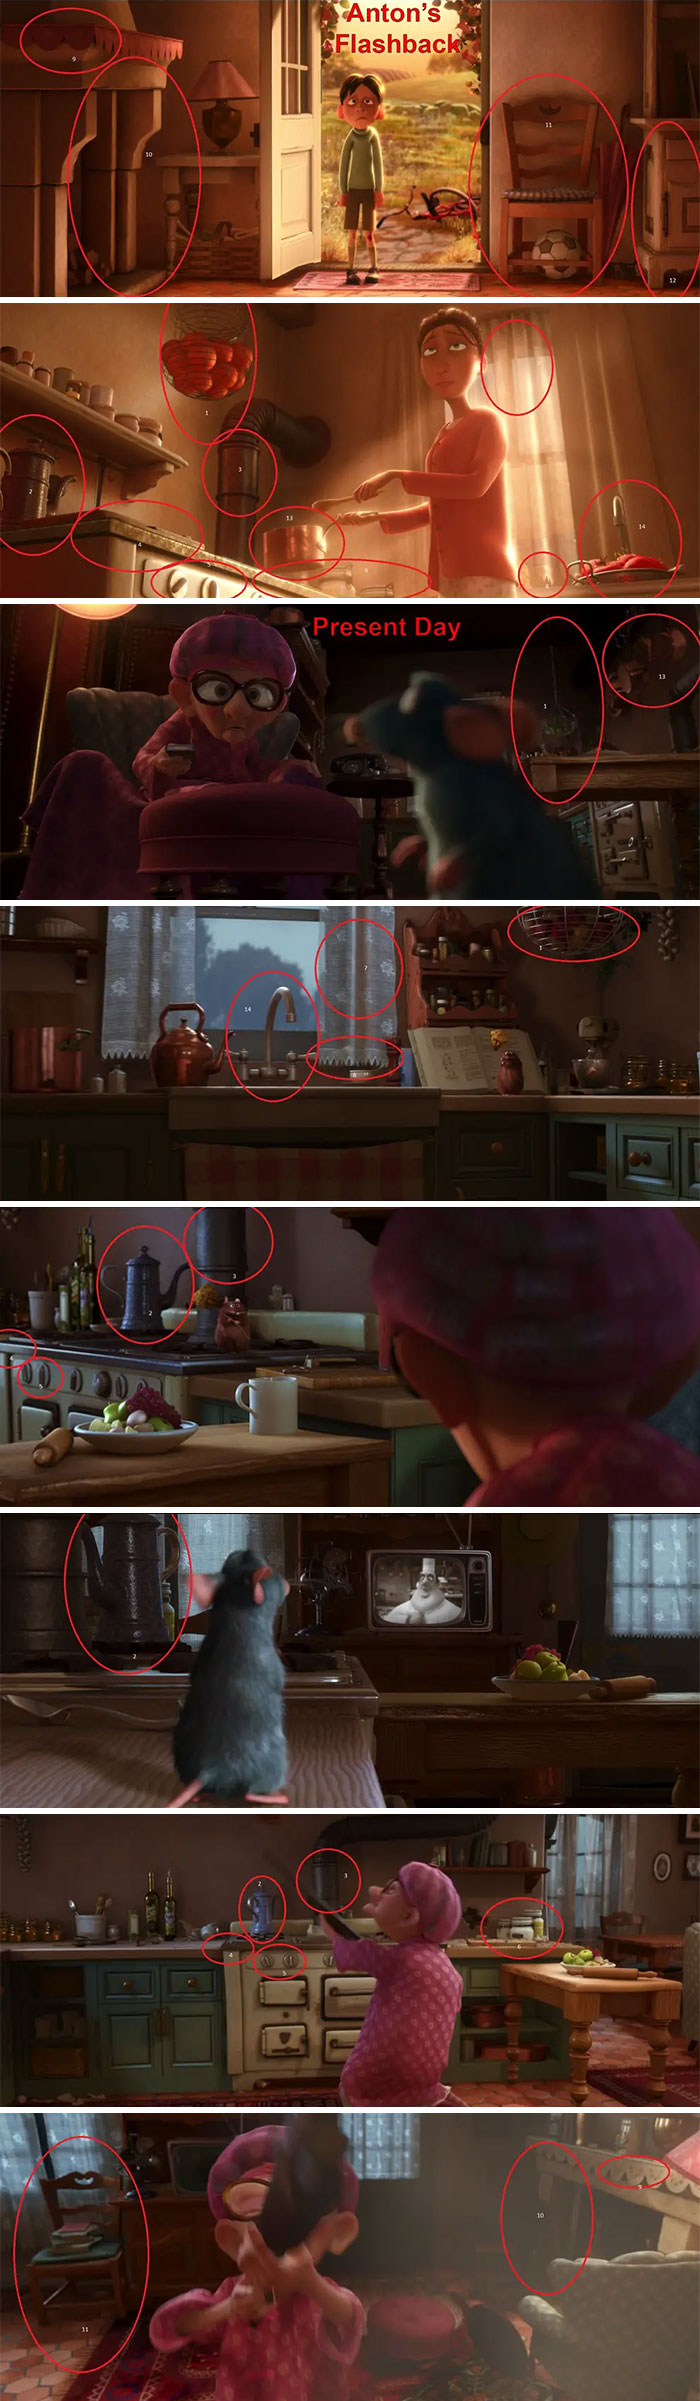 When Anton Tastes Remy's Ratatouille, He's Reminded Of His Mother's Cooking. There's A Few Hidden Details That Suggest Remy Grew Up In Anton's Mother's House, Learning To Cook By Watching Anton's Mother